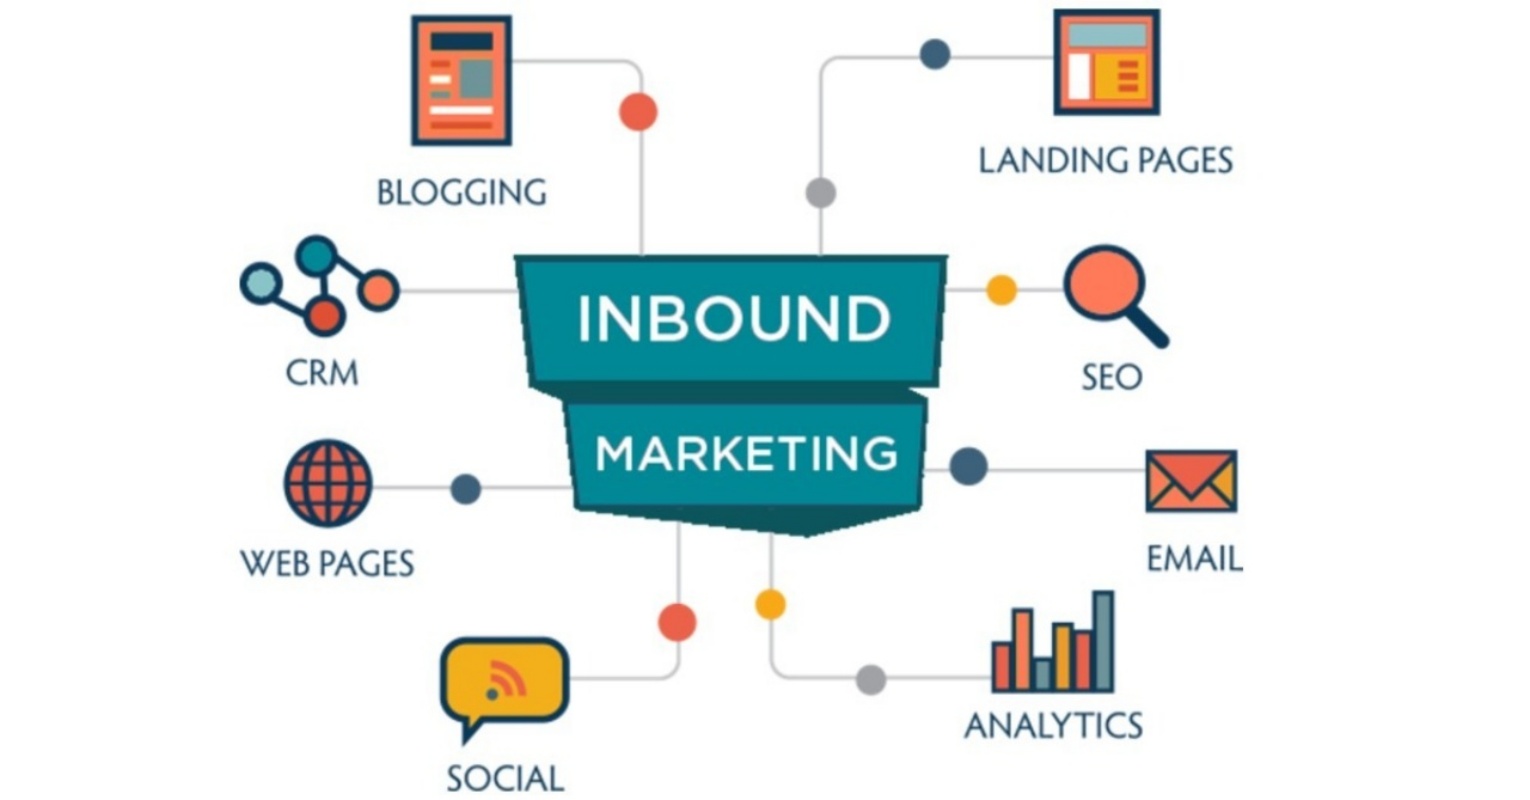 tong-hop-cac-cong-cu-ho-tro-cho-chien-dich-inbound-marketing